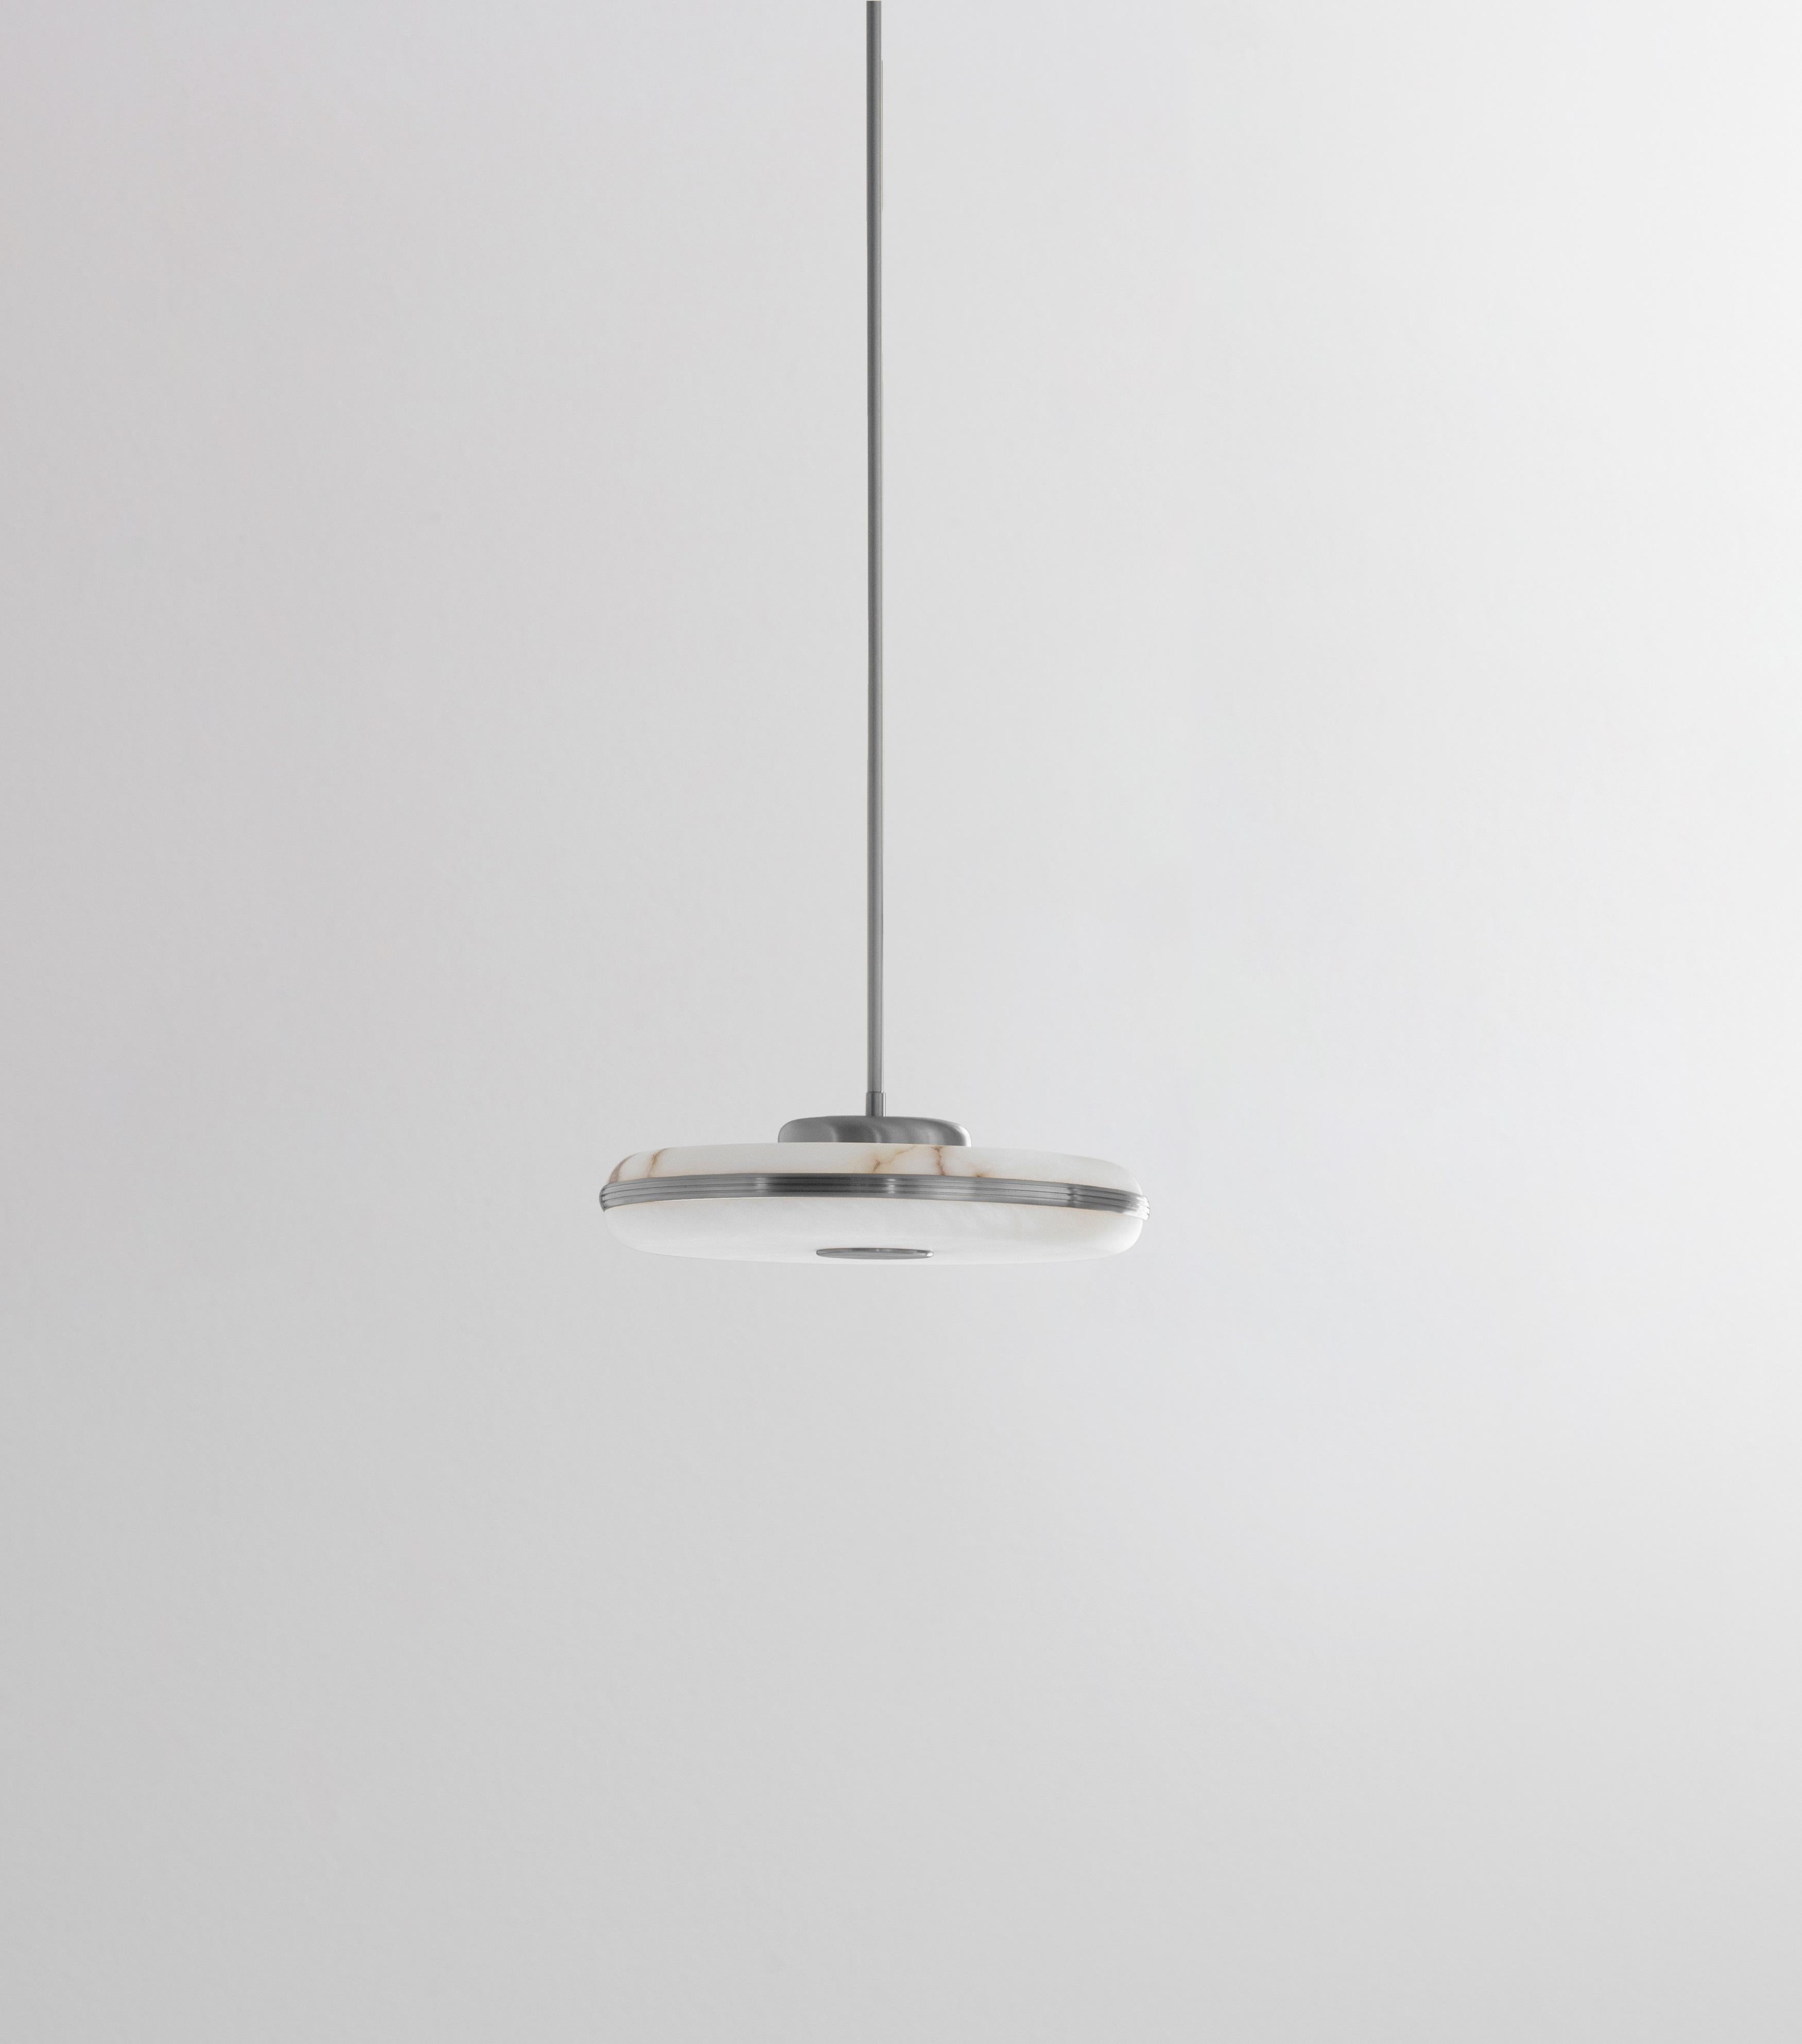 Beran Satin Nickel Large Pendant Lamp by Bert Frank
Dimensions: Ø 36 x H 6 cm. 
Materials: Satin nickel and alabaster.

Available in two different sizes. Available in different finishes and materials. Height is customized to order. Please contact